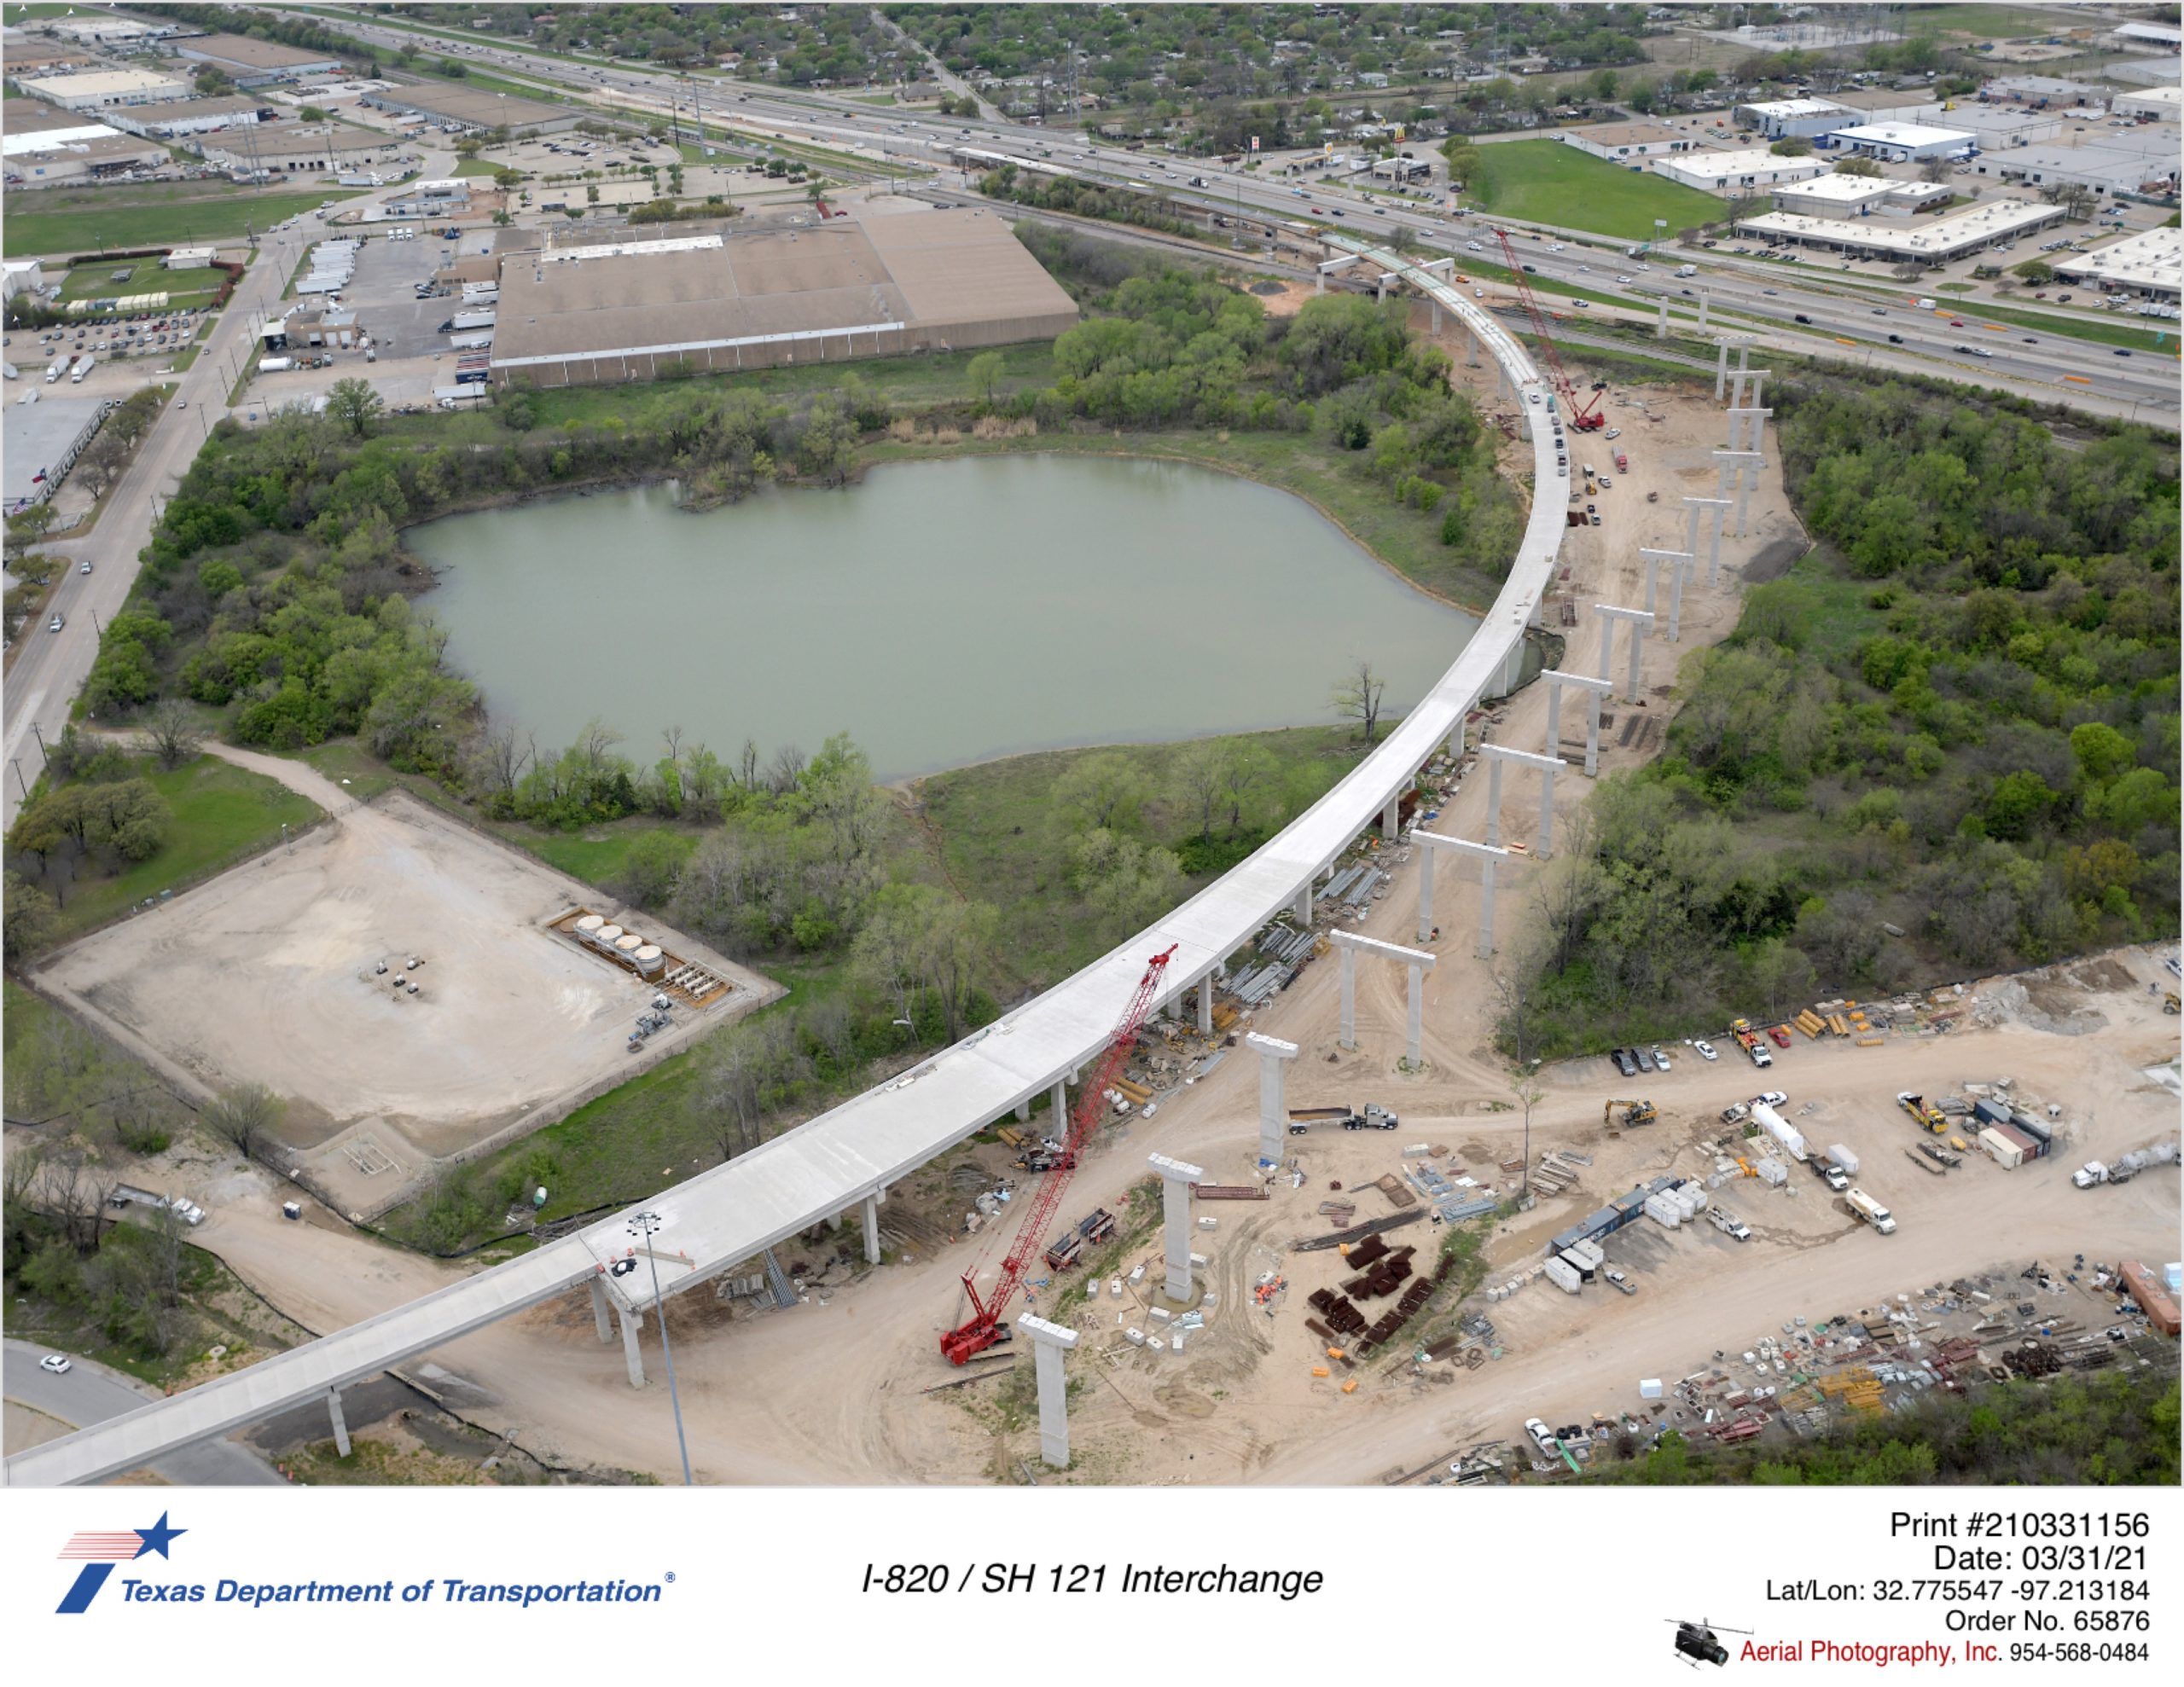 Between I-820 and SH 121 focused on new direct connector ramp construction.